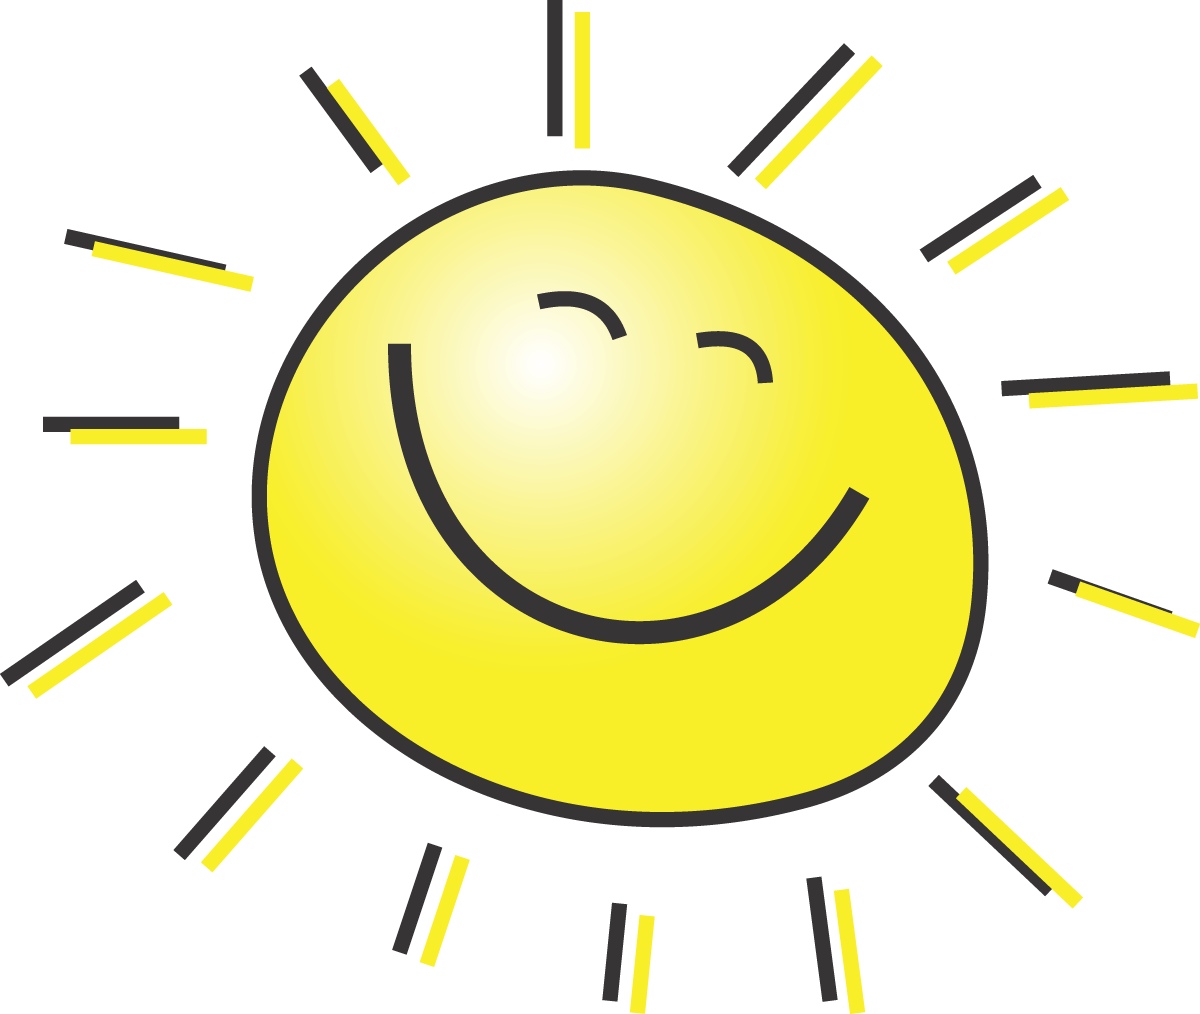 Smiling Sun Png - ClipArt Best